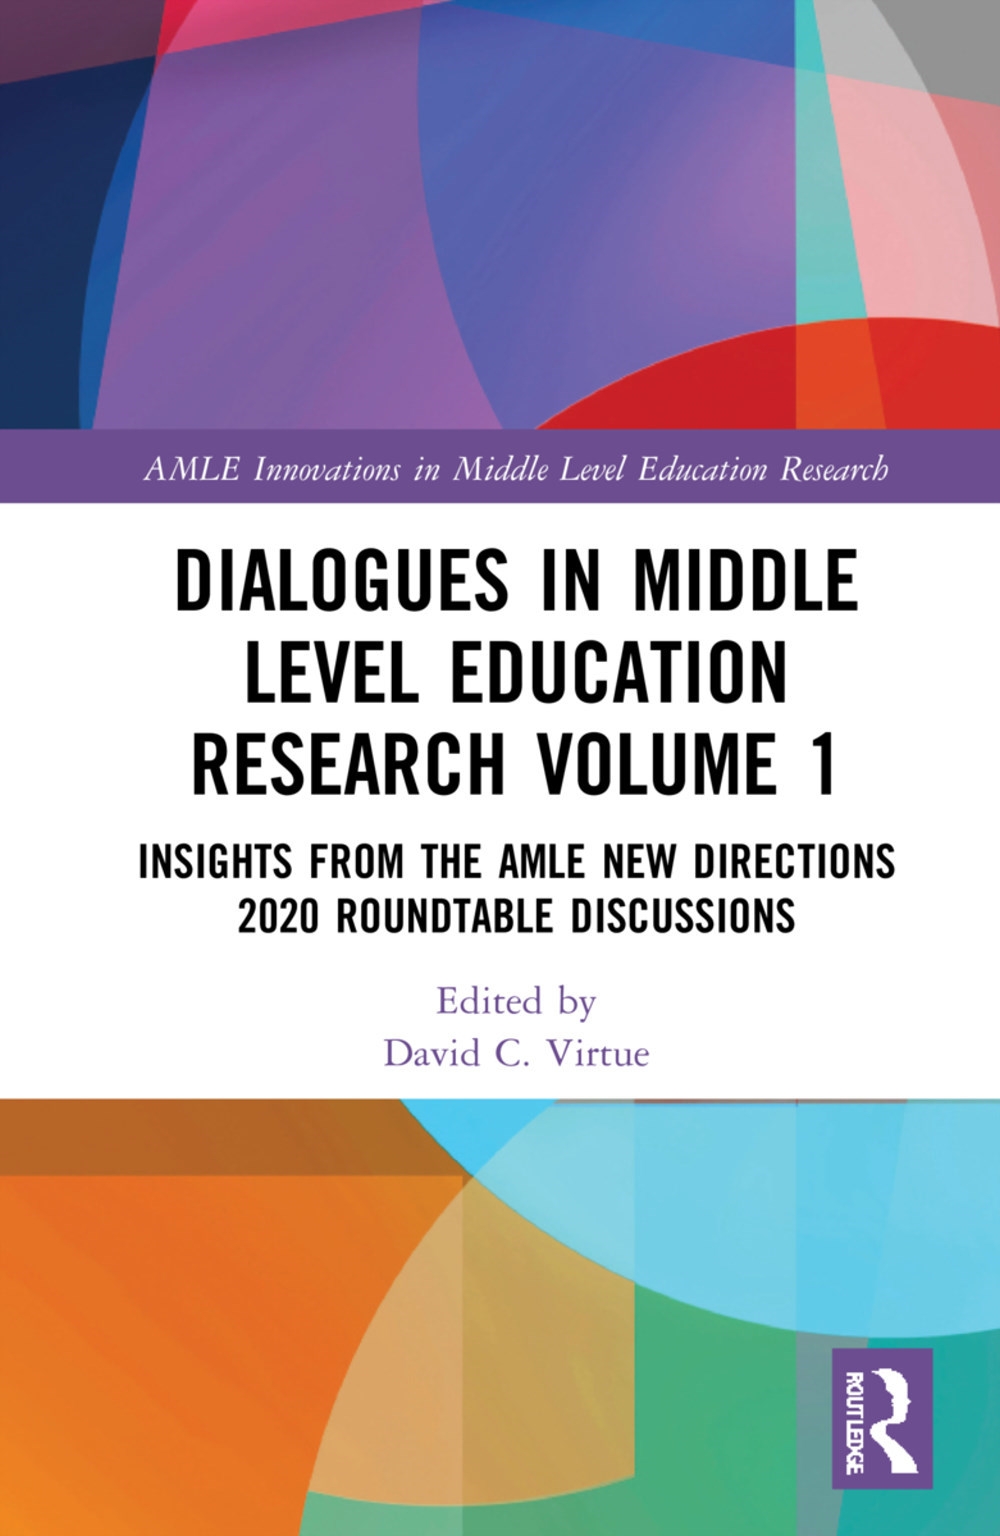 Dialogues in Middle Level Education Research Volume 1: Insights from the Amle New Directions 2020 Roundtable Discussions